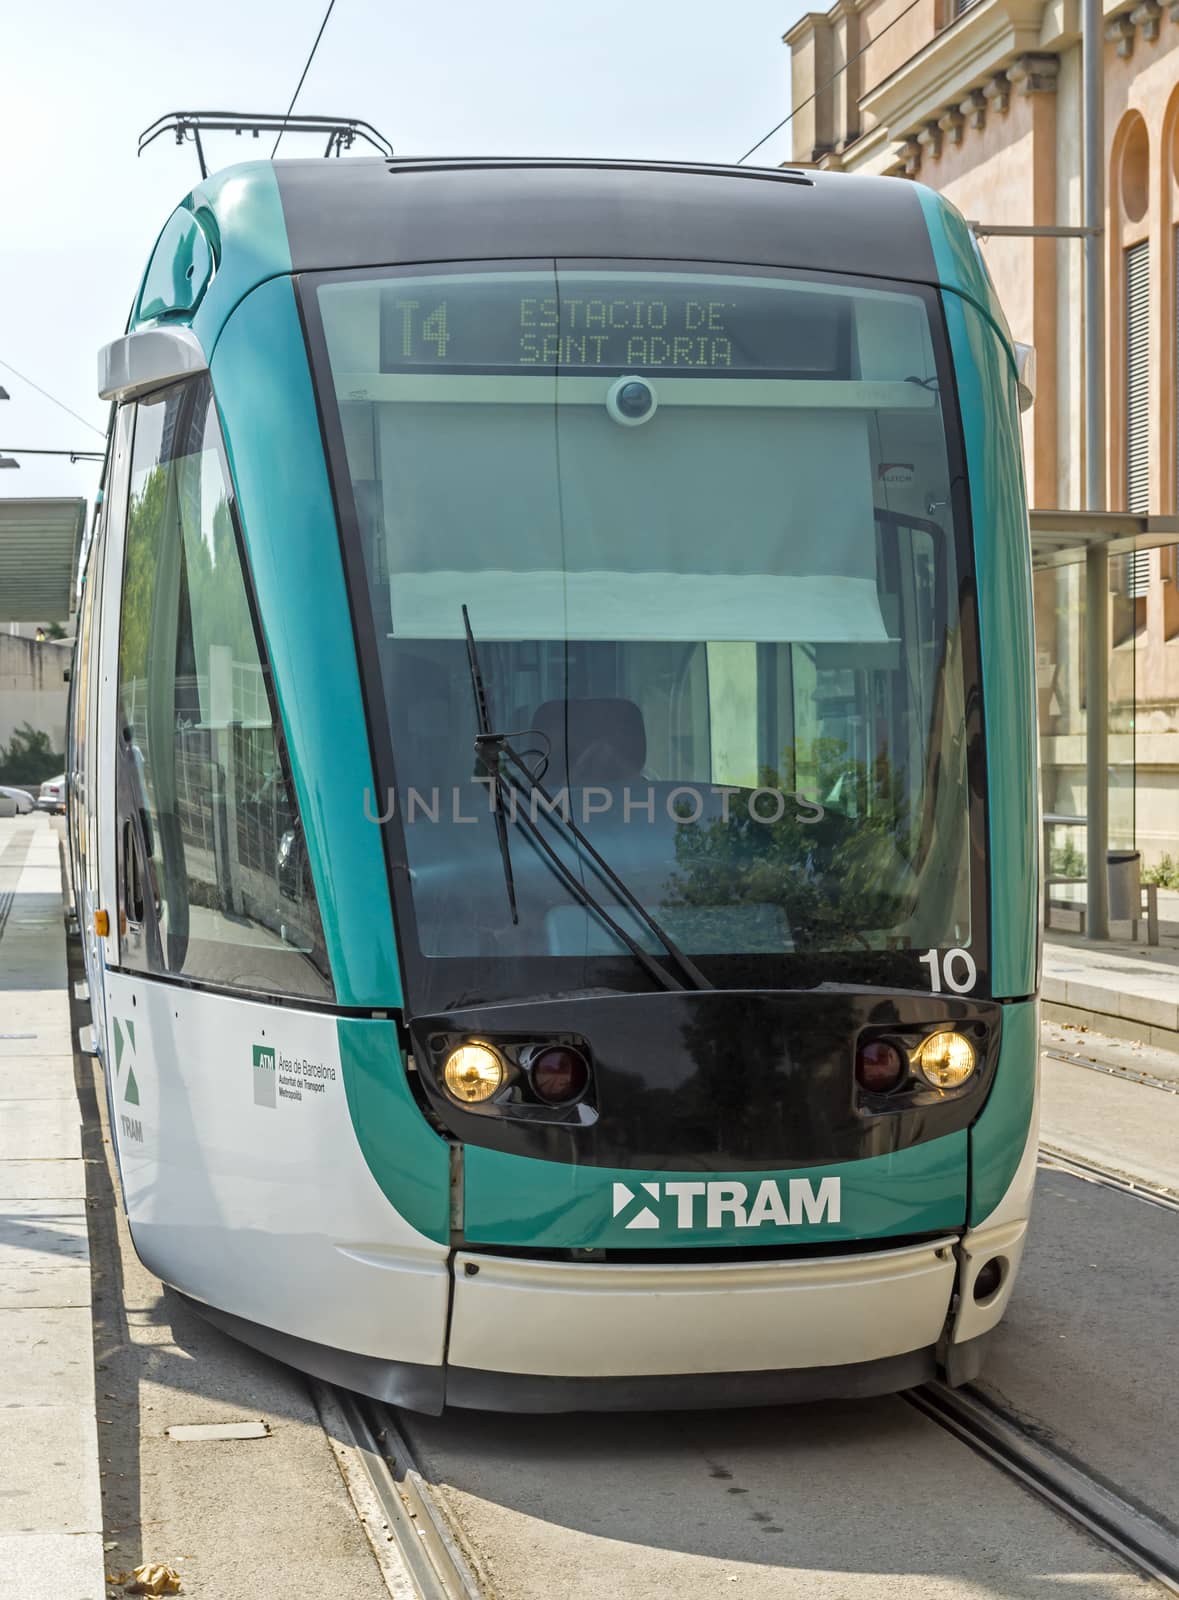 BARCELONA, SPAIN - JULY 12, 2015: Barcelona tram known as Trambaix. The tram is going through the Diagonal avenue.

Barcelona, Spain - July 12, 2015: Barcelona tram known as Trambaix. The tram is going through the Diagonal avenue.